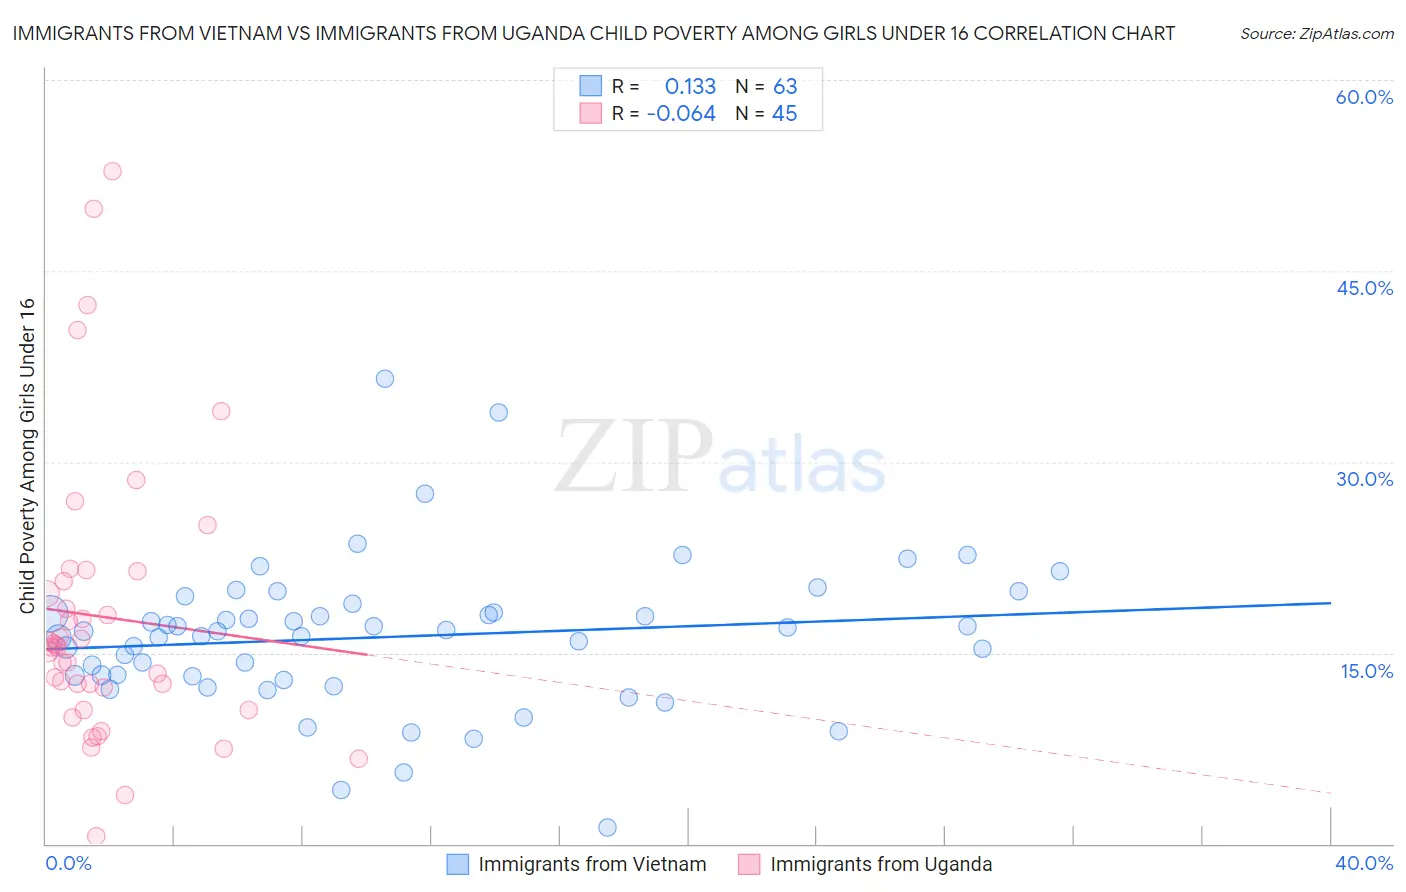 Immigrants from Vietnam vs Immigrants from Uganda Child Poverty Among Girls Under 16